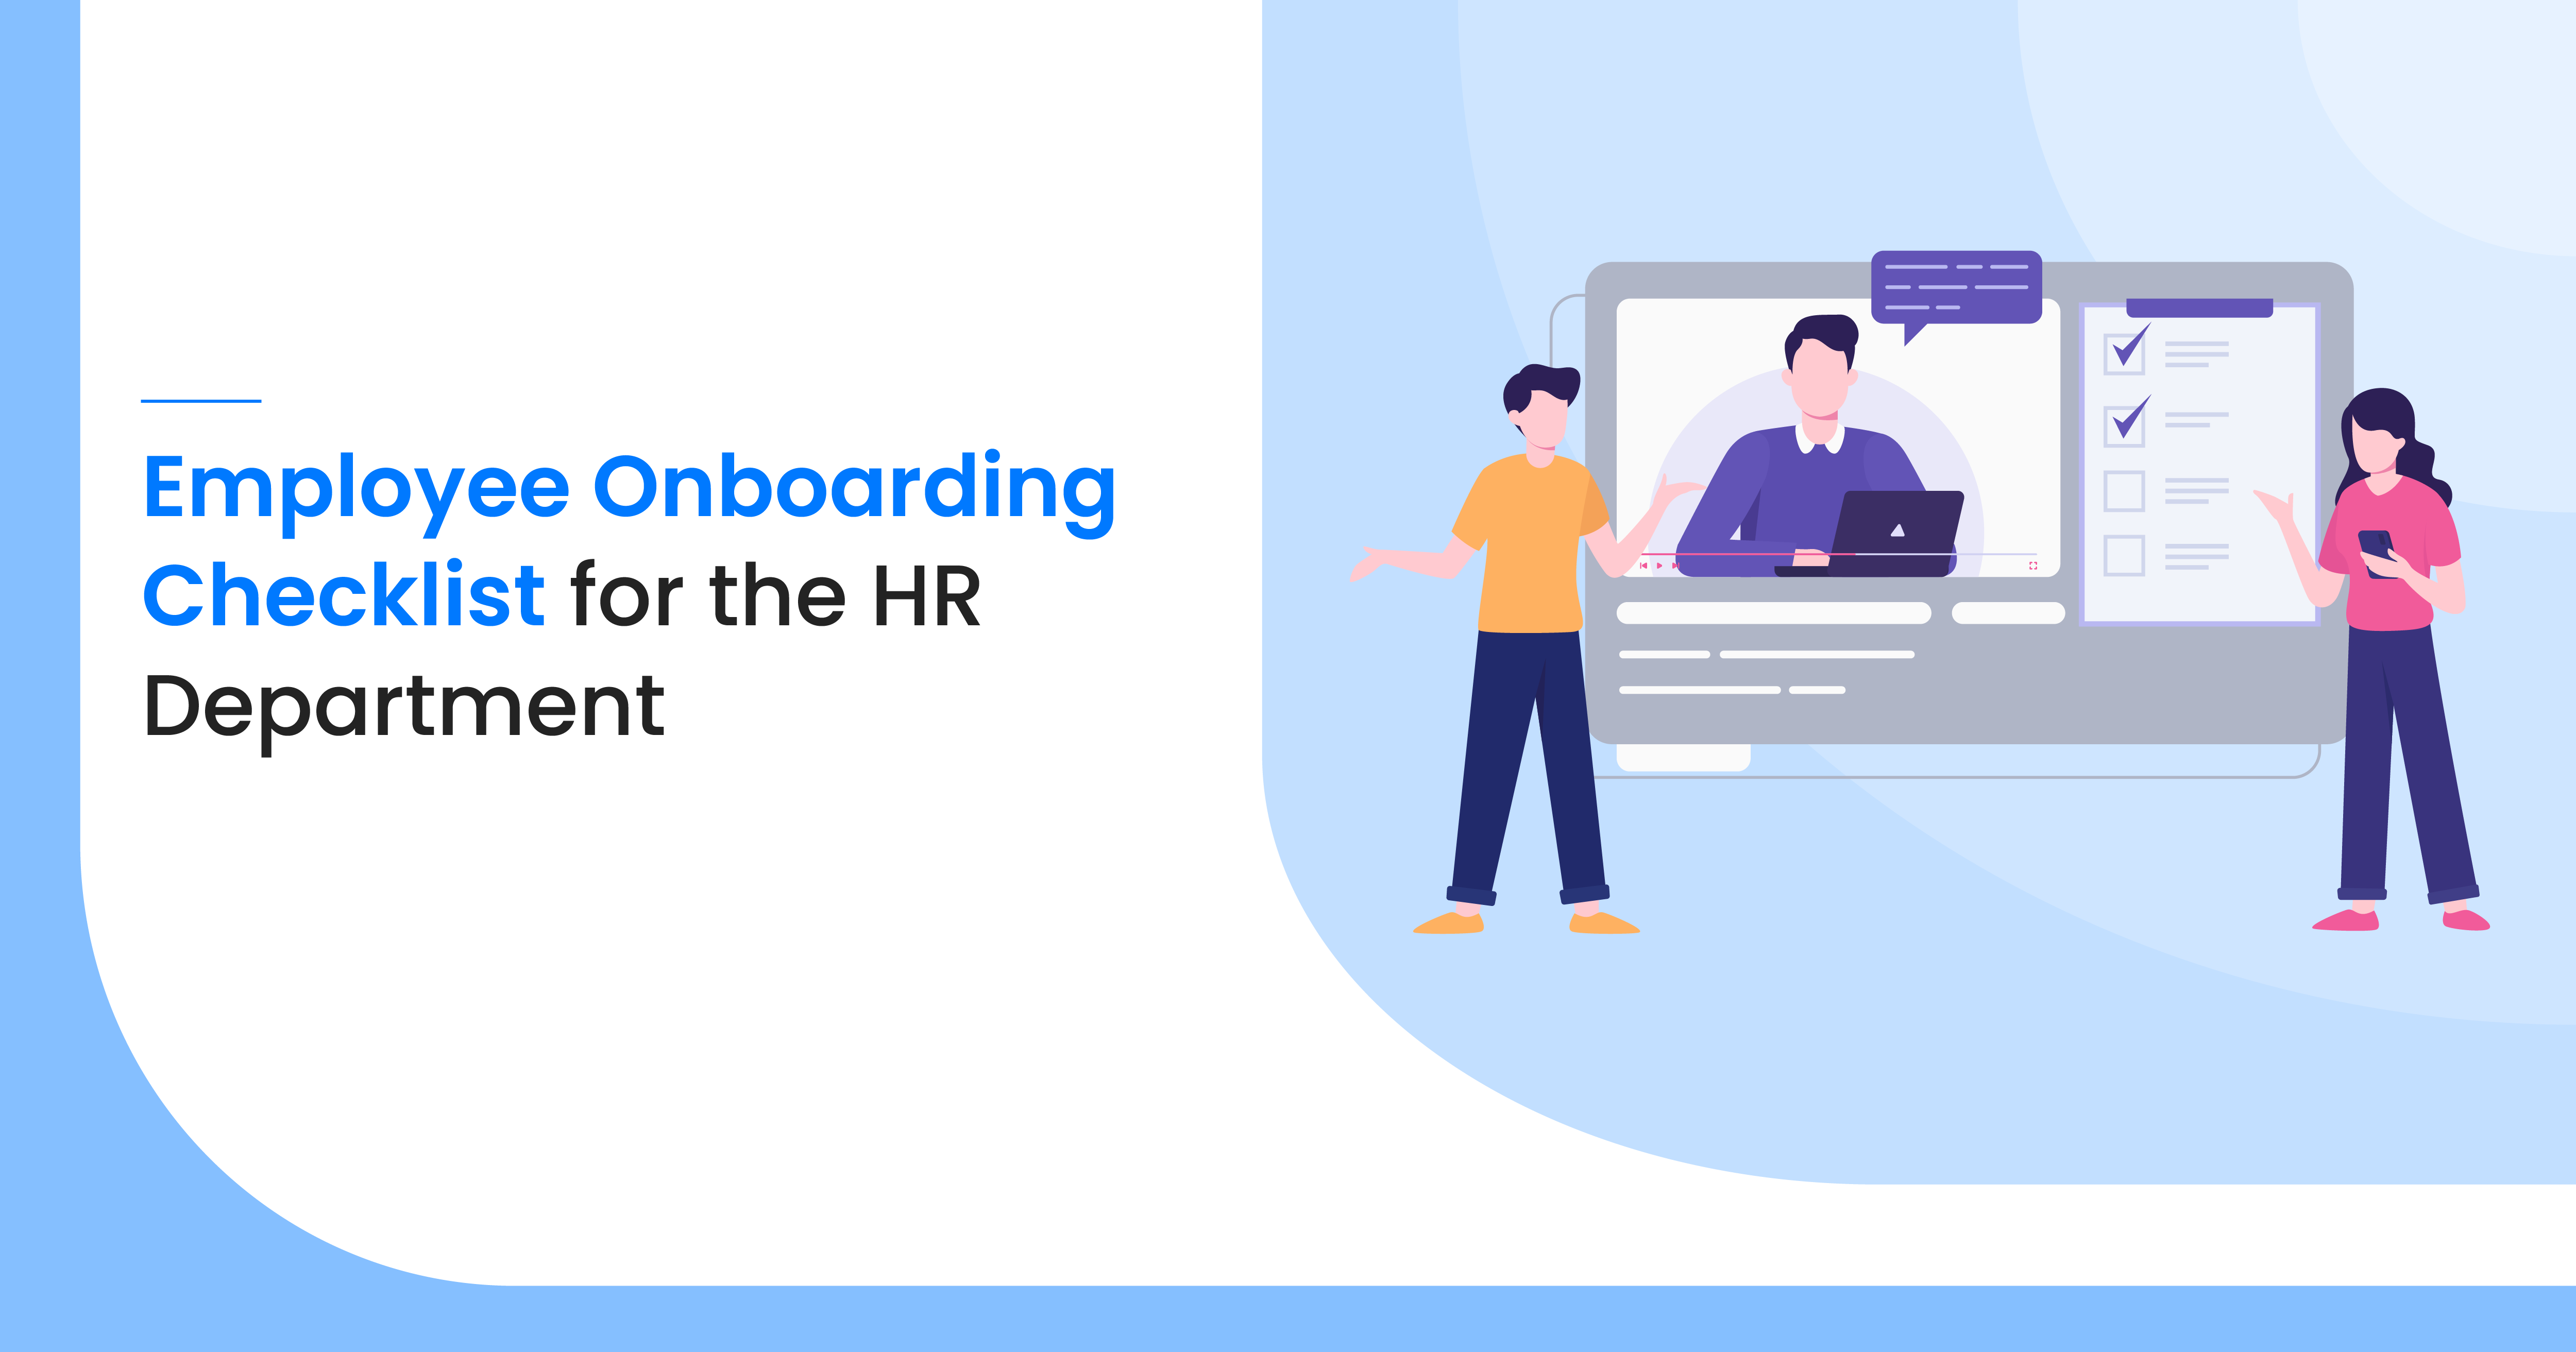 Step by Step Employee Onboarding Checklist for the HR Department